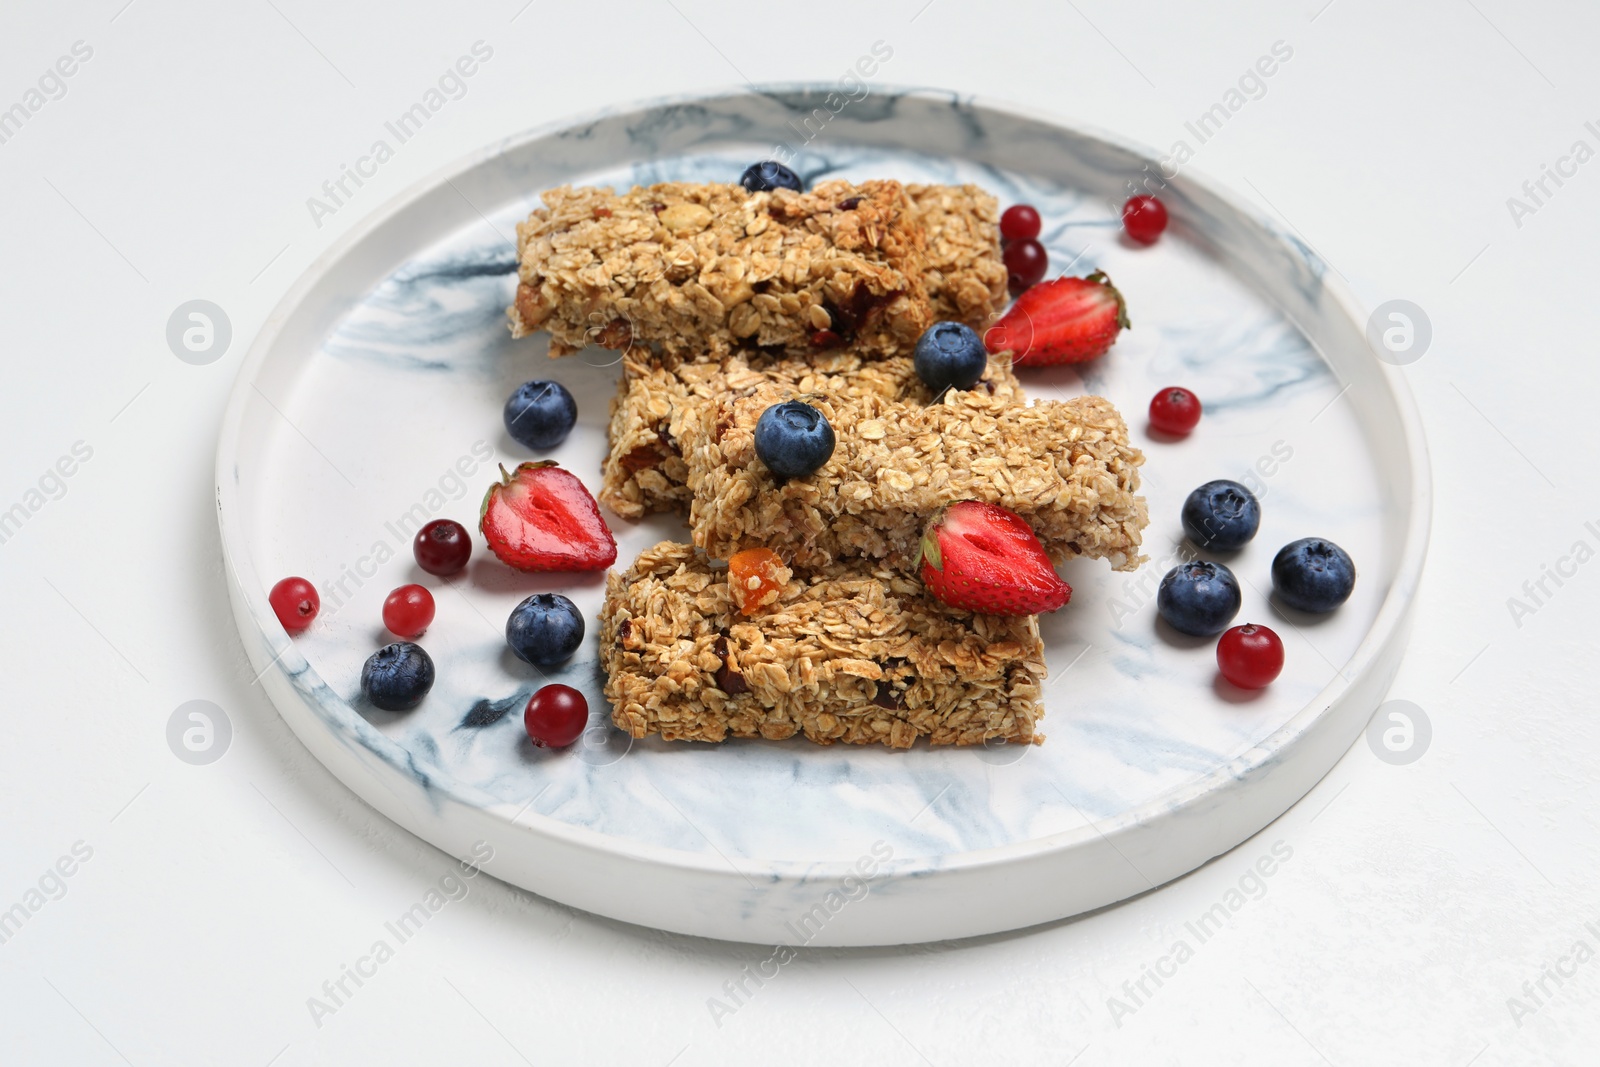 Photo of Tasty granola bars and berries on white background